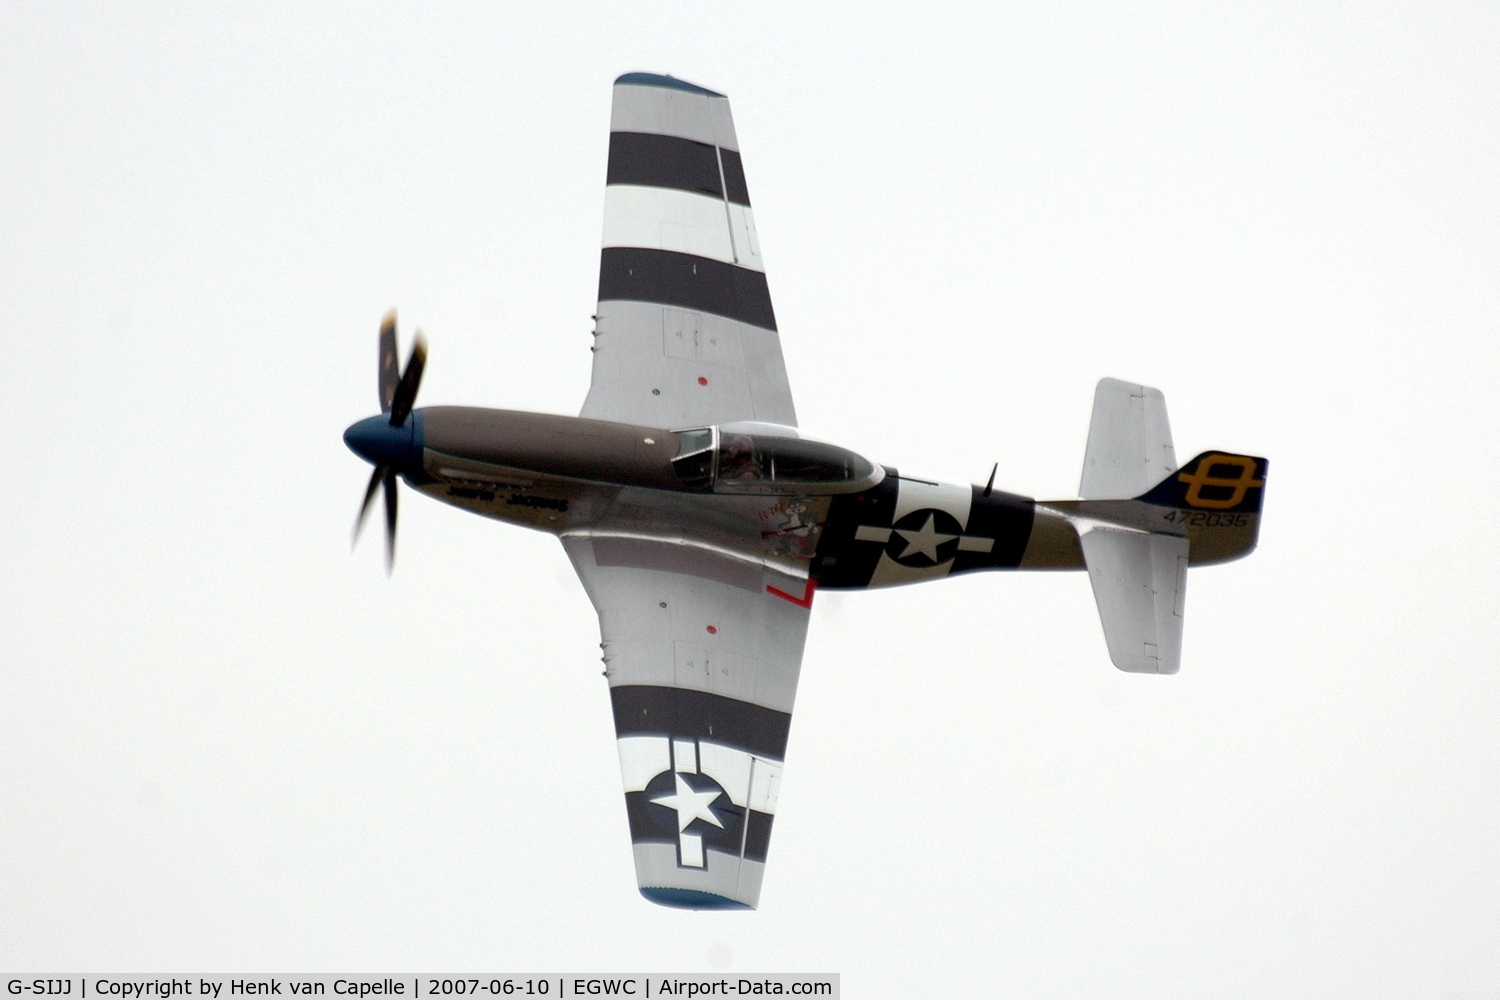 G-SIJJ, 1944 North American P-51D Mustang C/N 122-31894 (44-72035), Jumpin' Jacques flown by its owner.